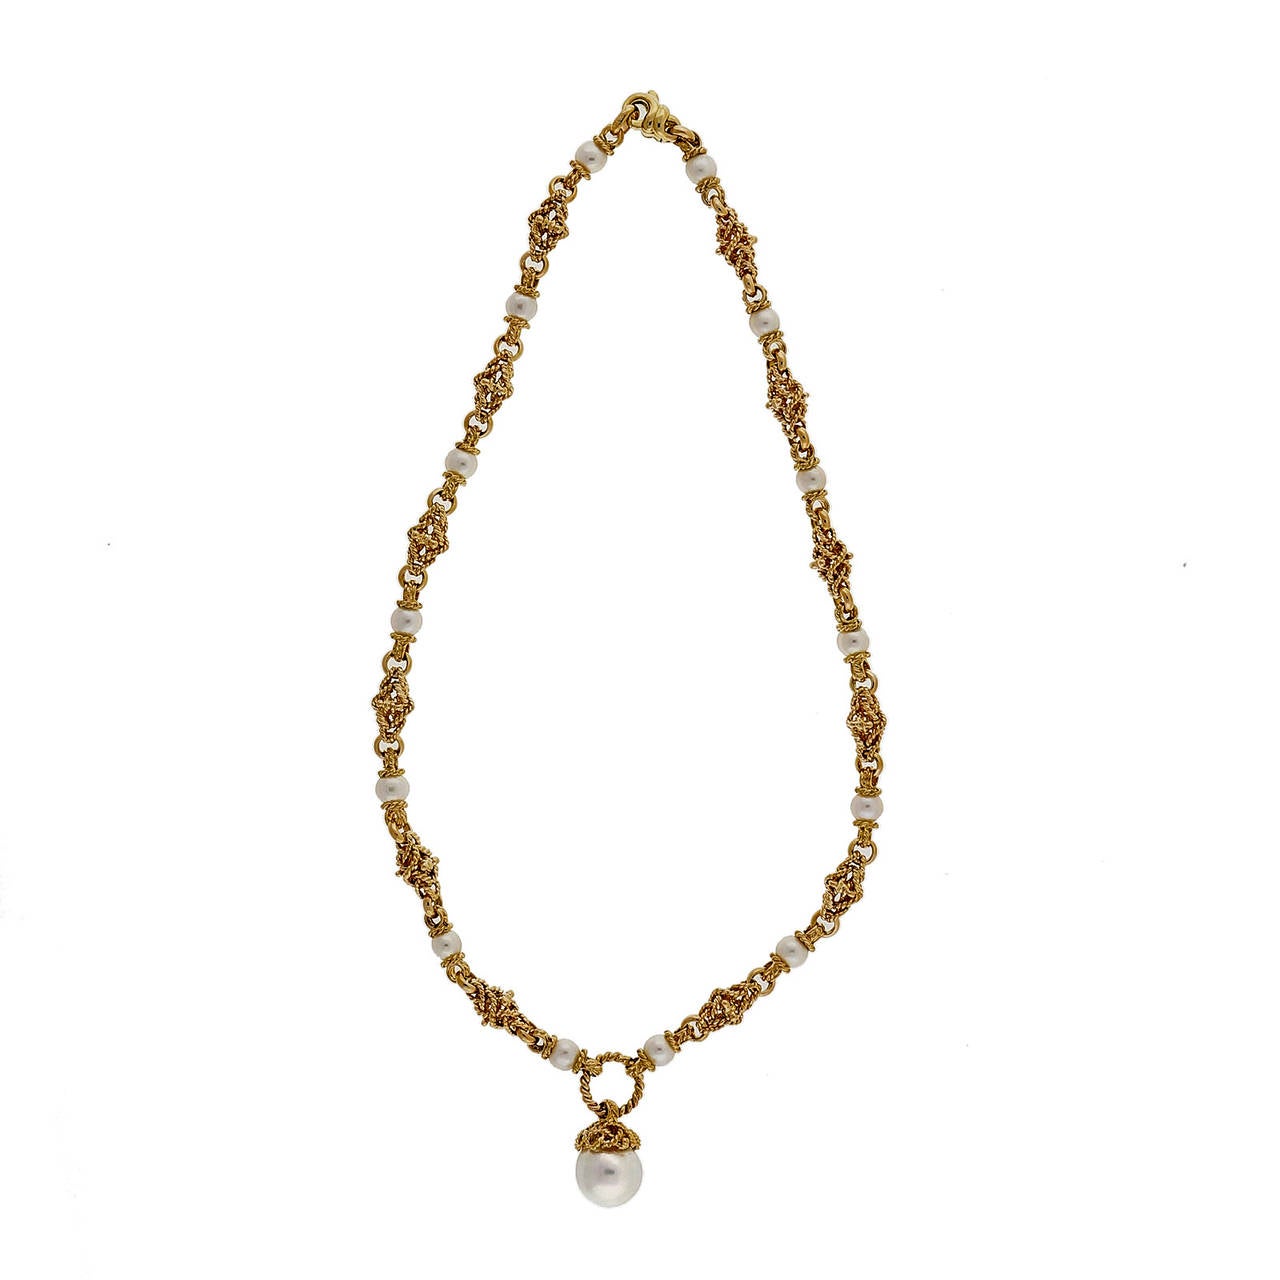 1960 Italian 18k yellow gold 3-D swirl textured section necklace with a South Sea cultured pearl center and cultured pearls through the chain.

14 Japanese white cultured pearls, 6.12mm, good lustre and few blemishes
1 South Sea white cultured